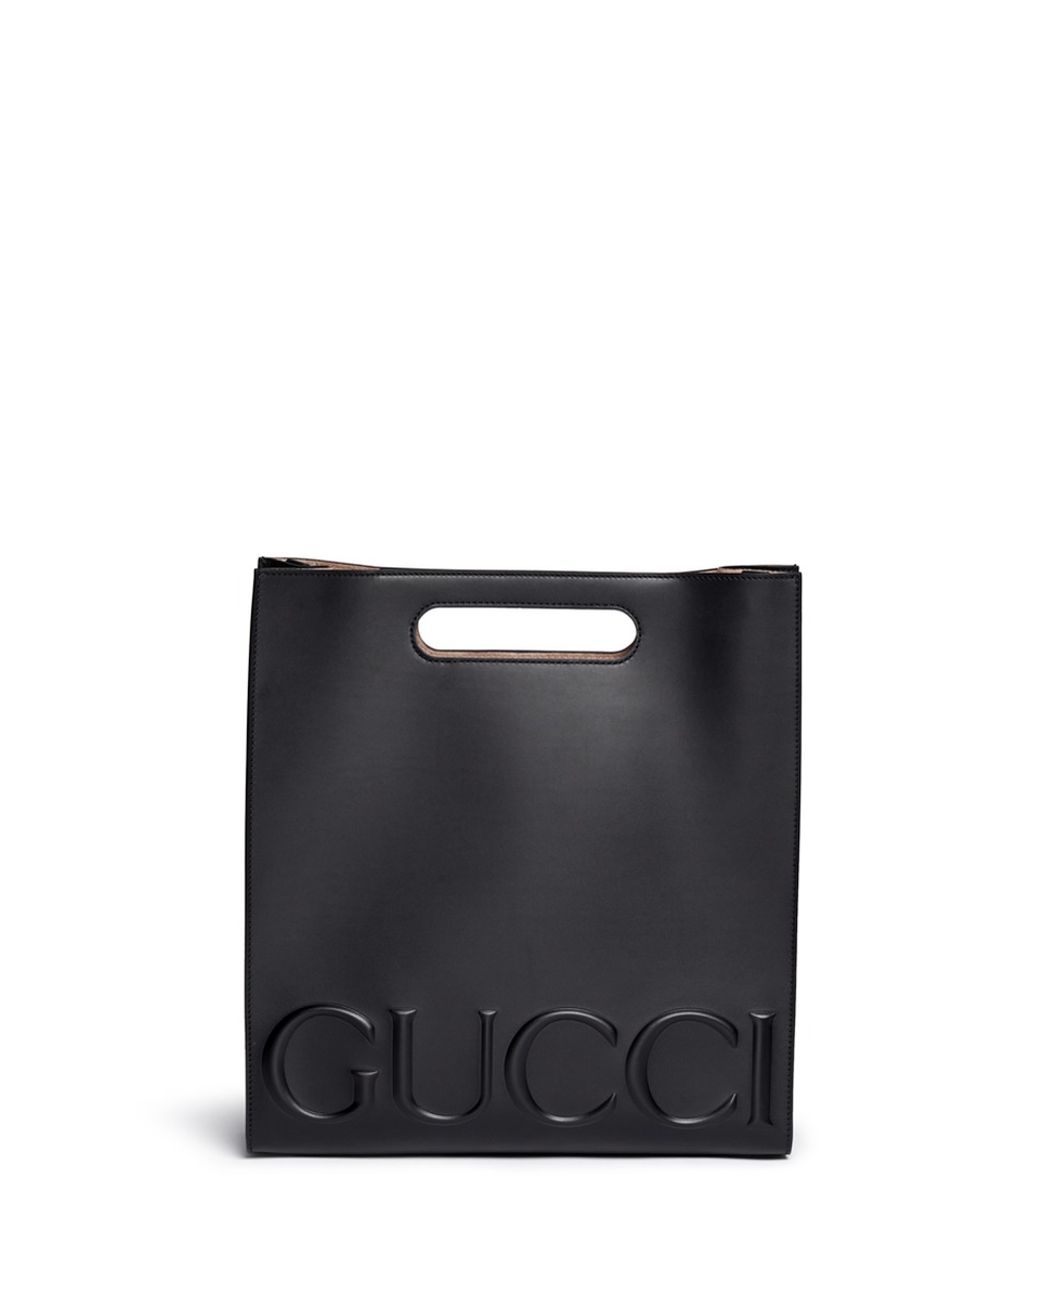 Gucci ' Xl' Large Logo Embossed Tote in Black